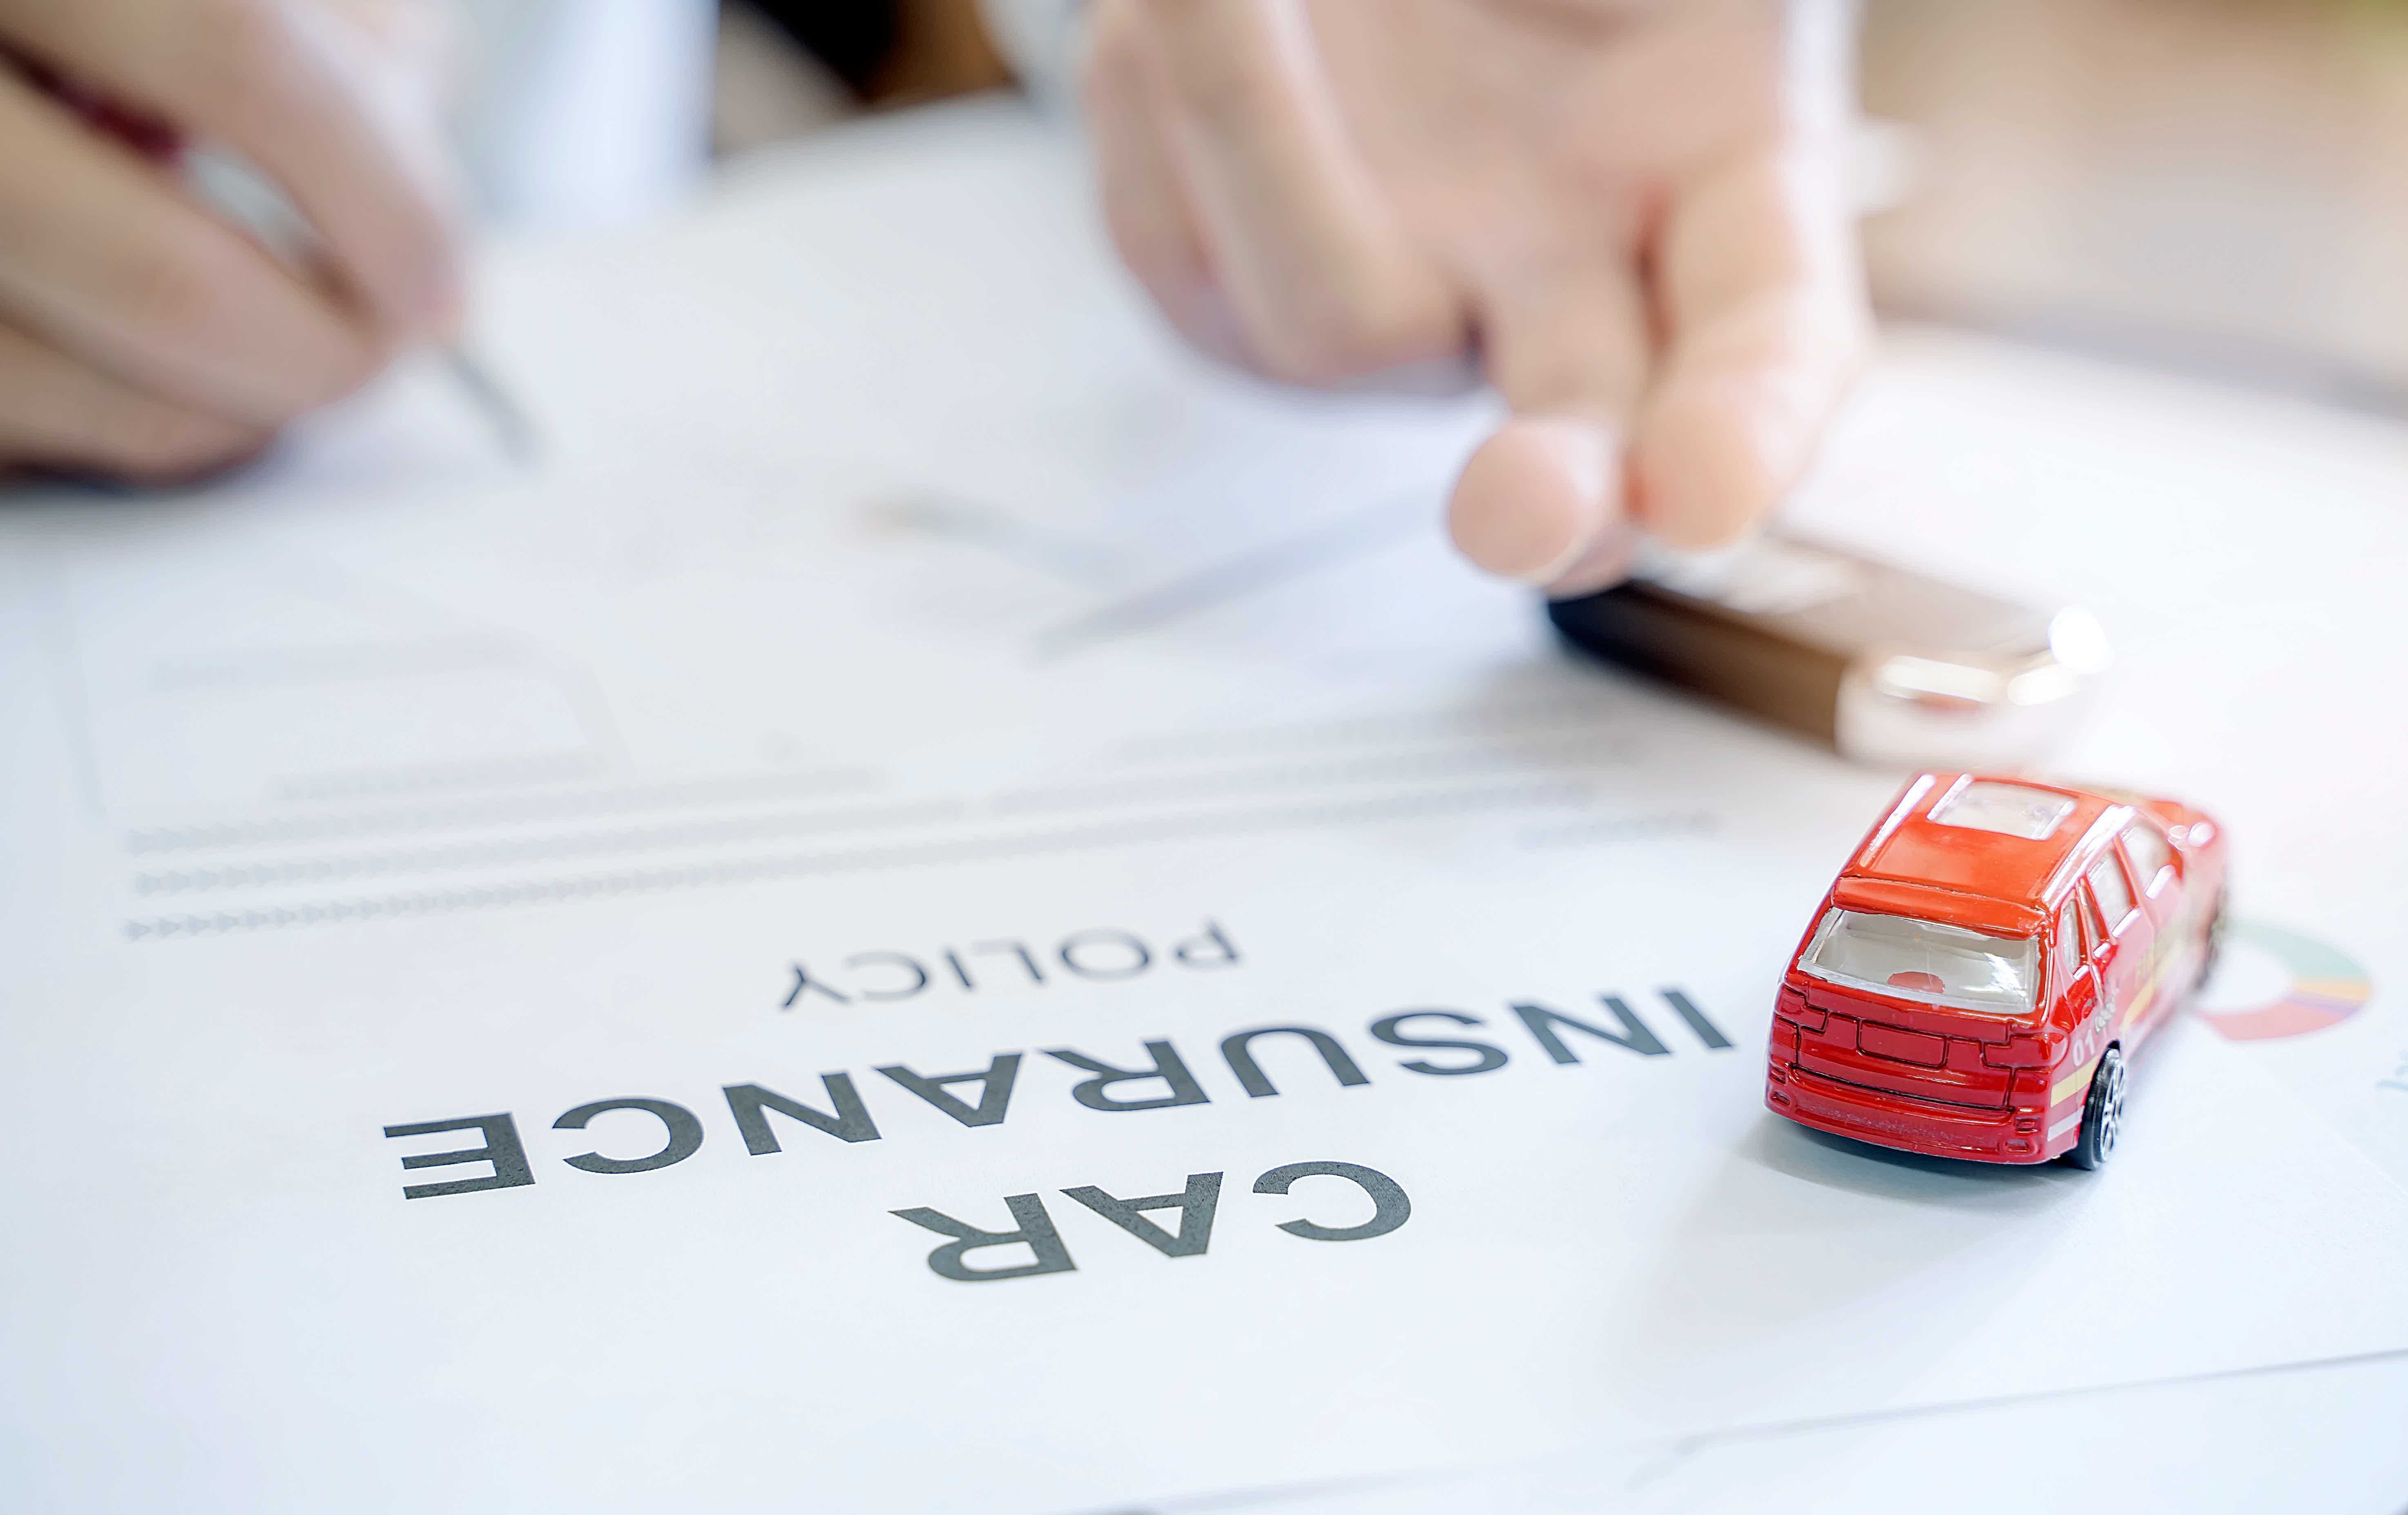 See if paying car insurance can really help build your credit score! Source: Adobe Stock